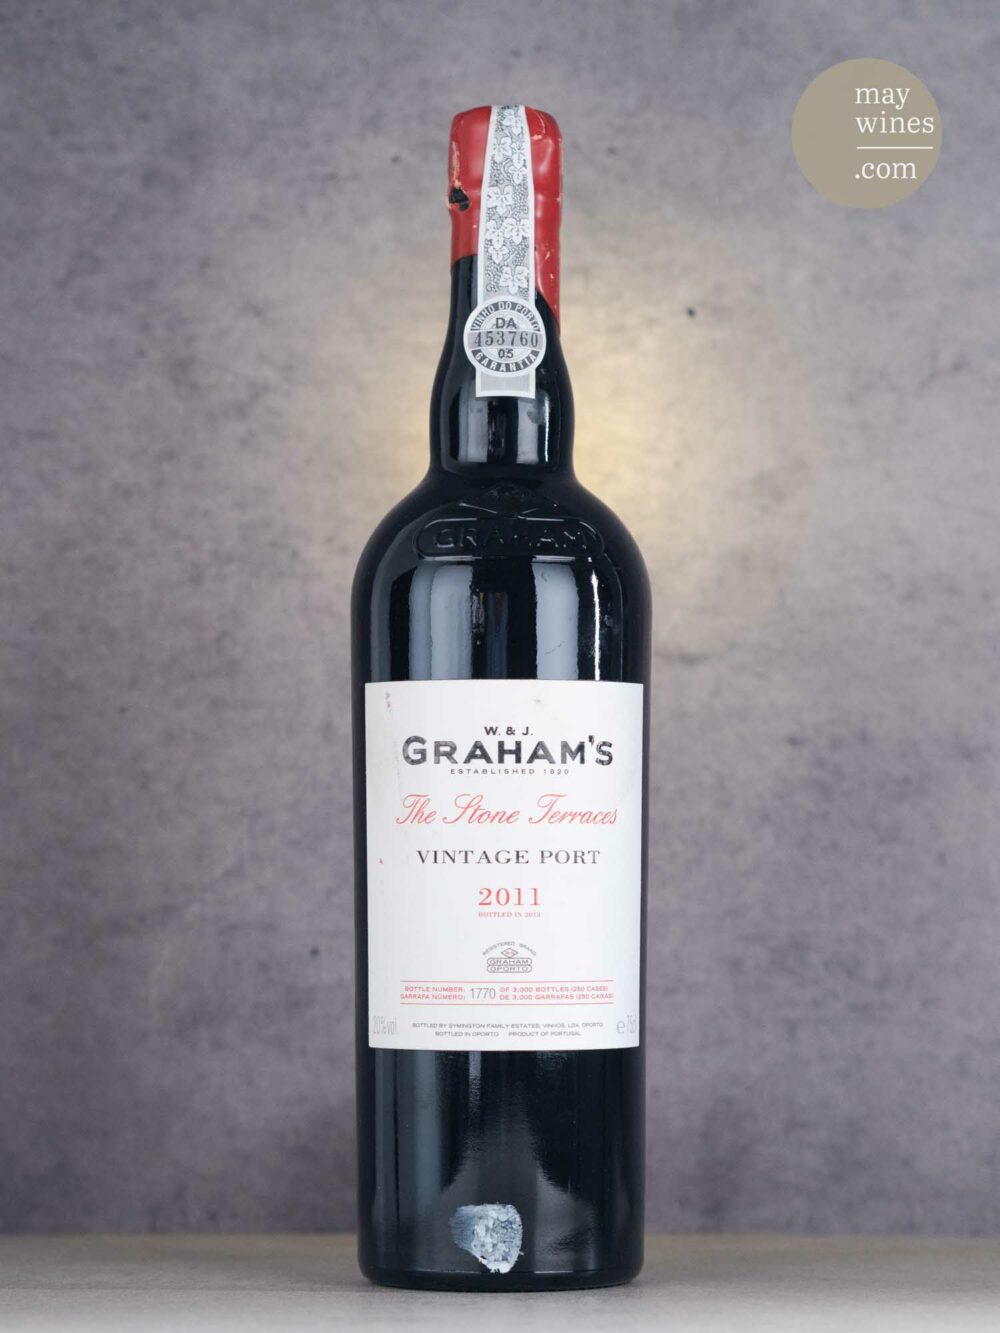 May Wines – Portwein – 2011 The Stone Terraces Vintage Port - Graham's